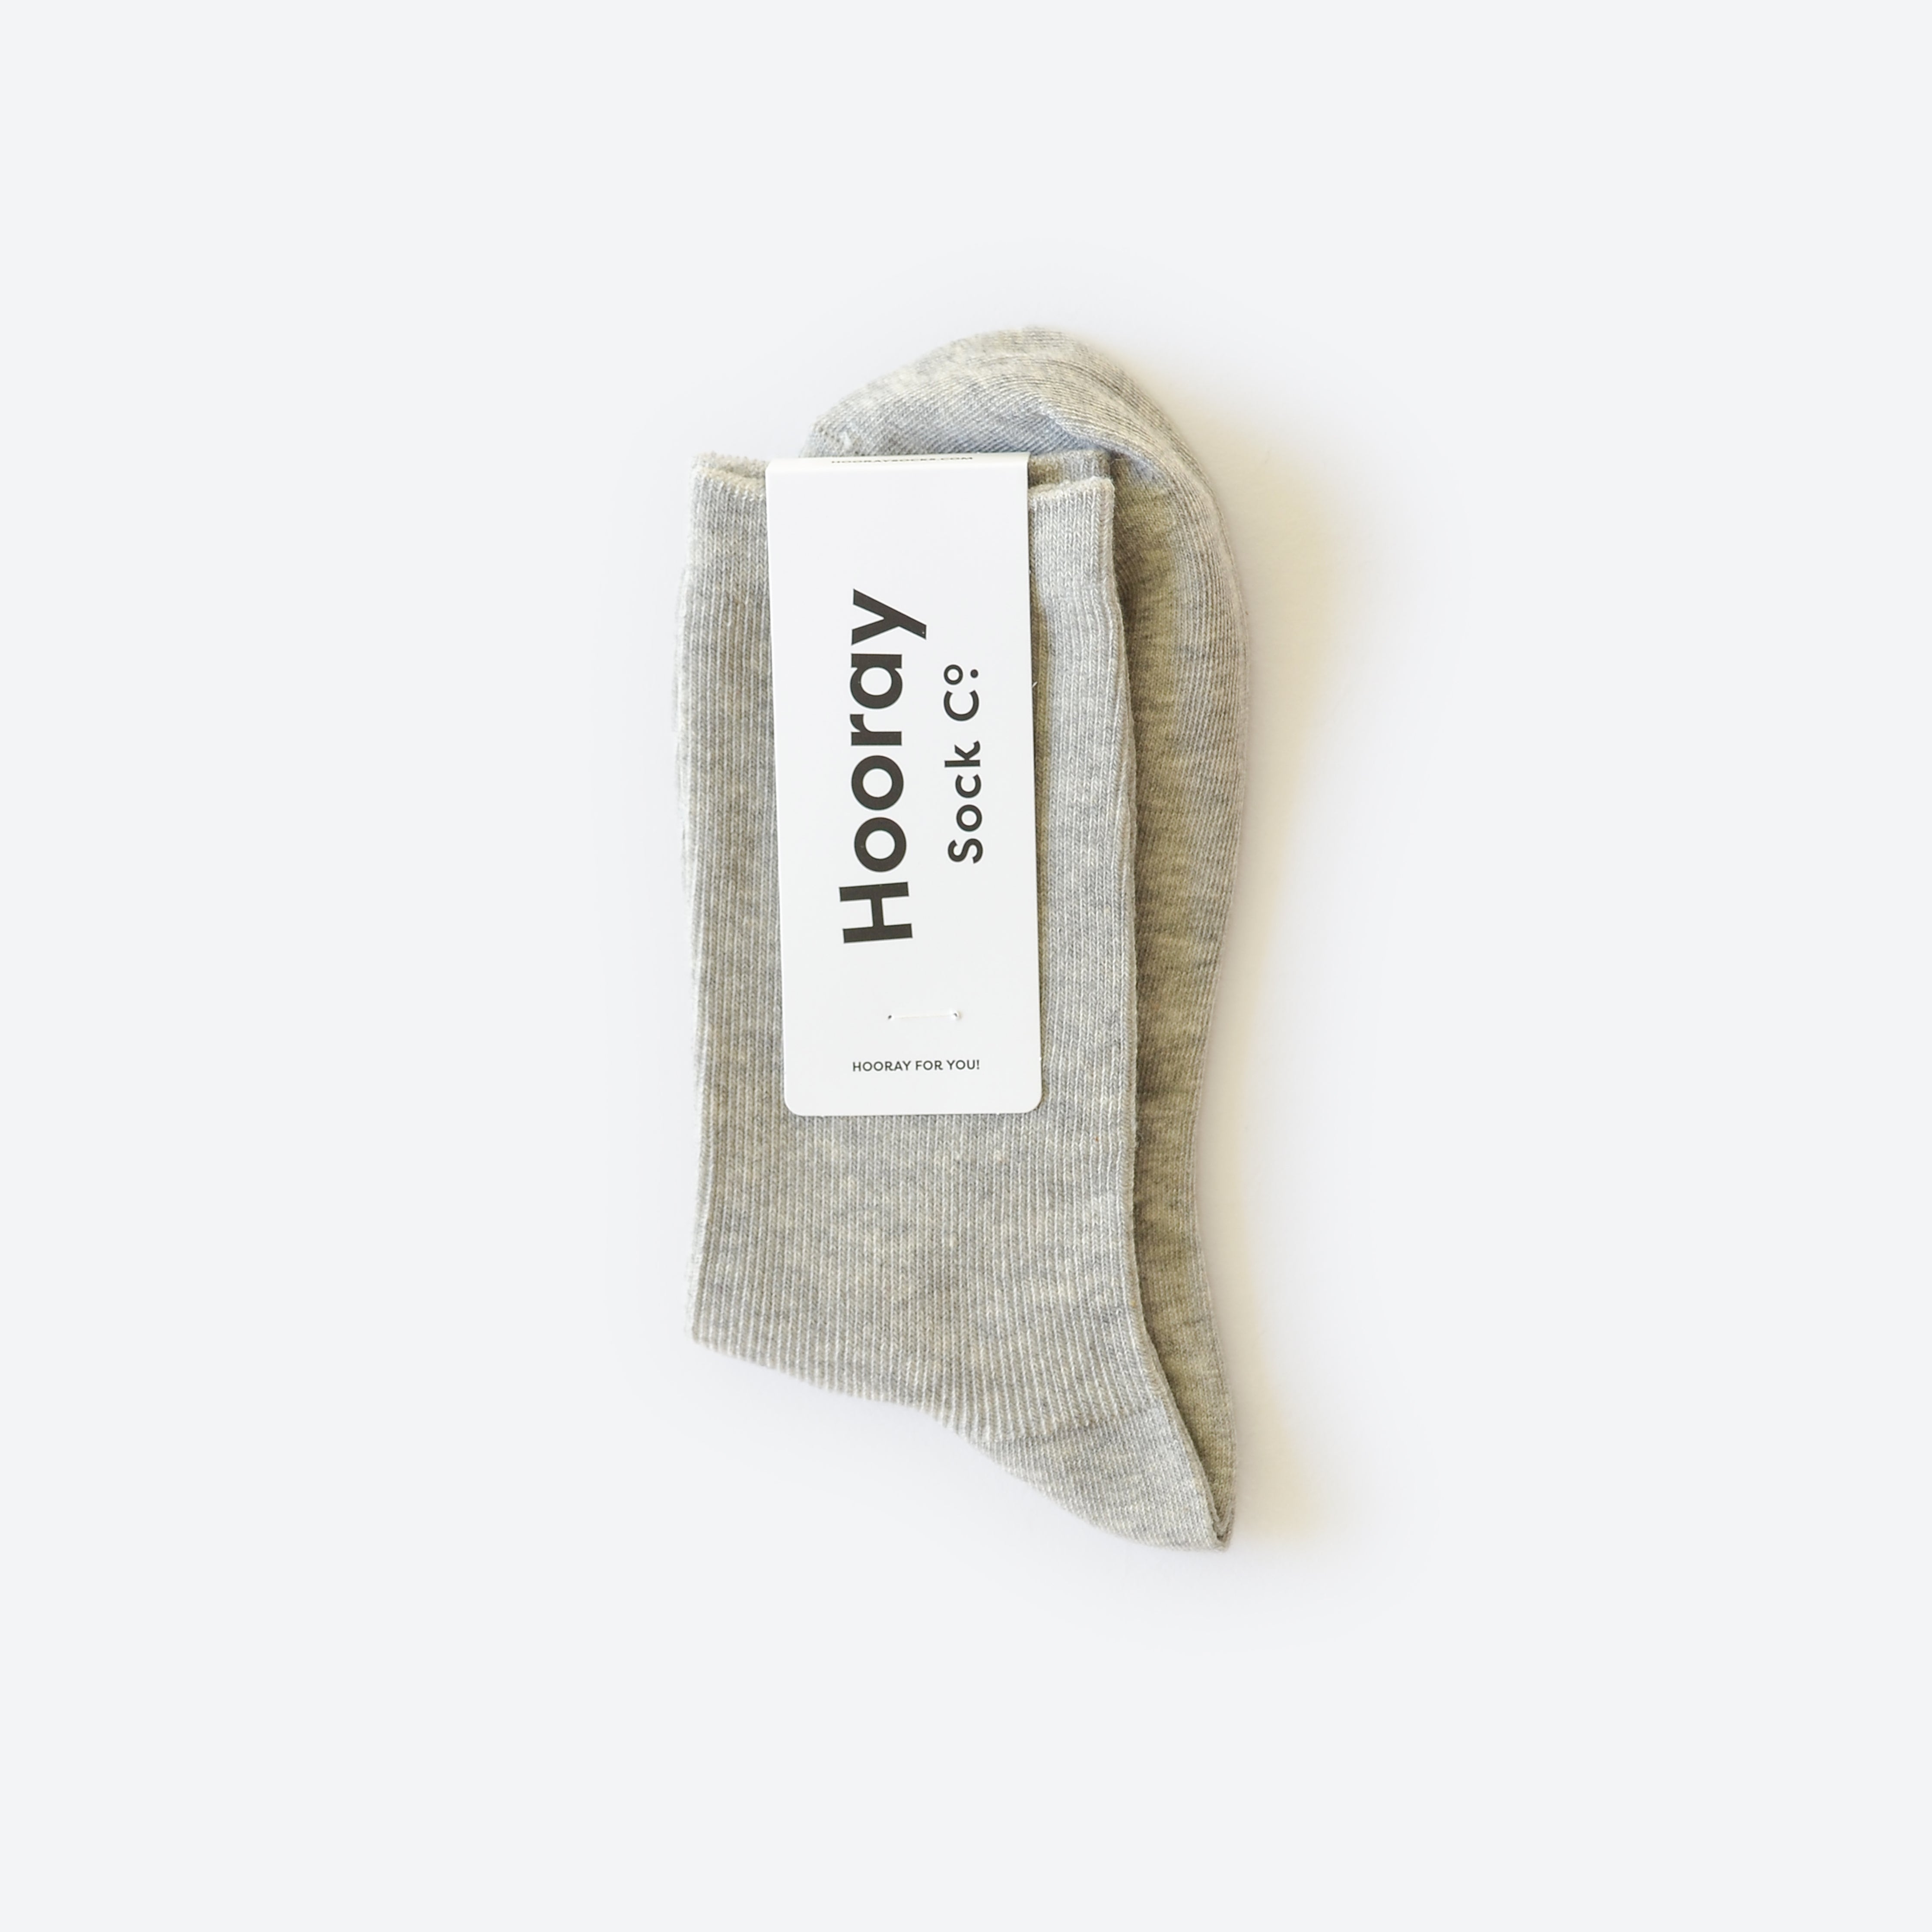 Hooray Sock Co.'s Cement Crew Socks: Everyday Cotton, Colorful hues, Comfy & Stylish. Petite crew, Cement grey, 80% cotton, 20% spandex. Made in South Korea. Unisex. Small (Women’s 4-10).